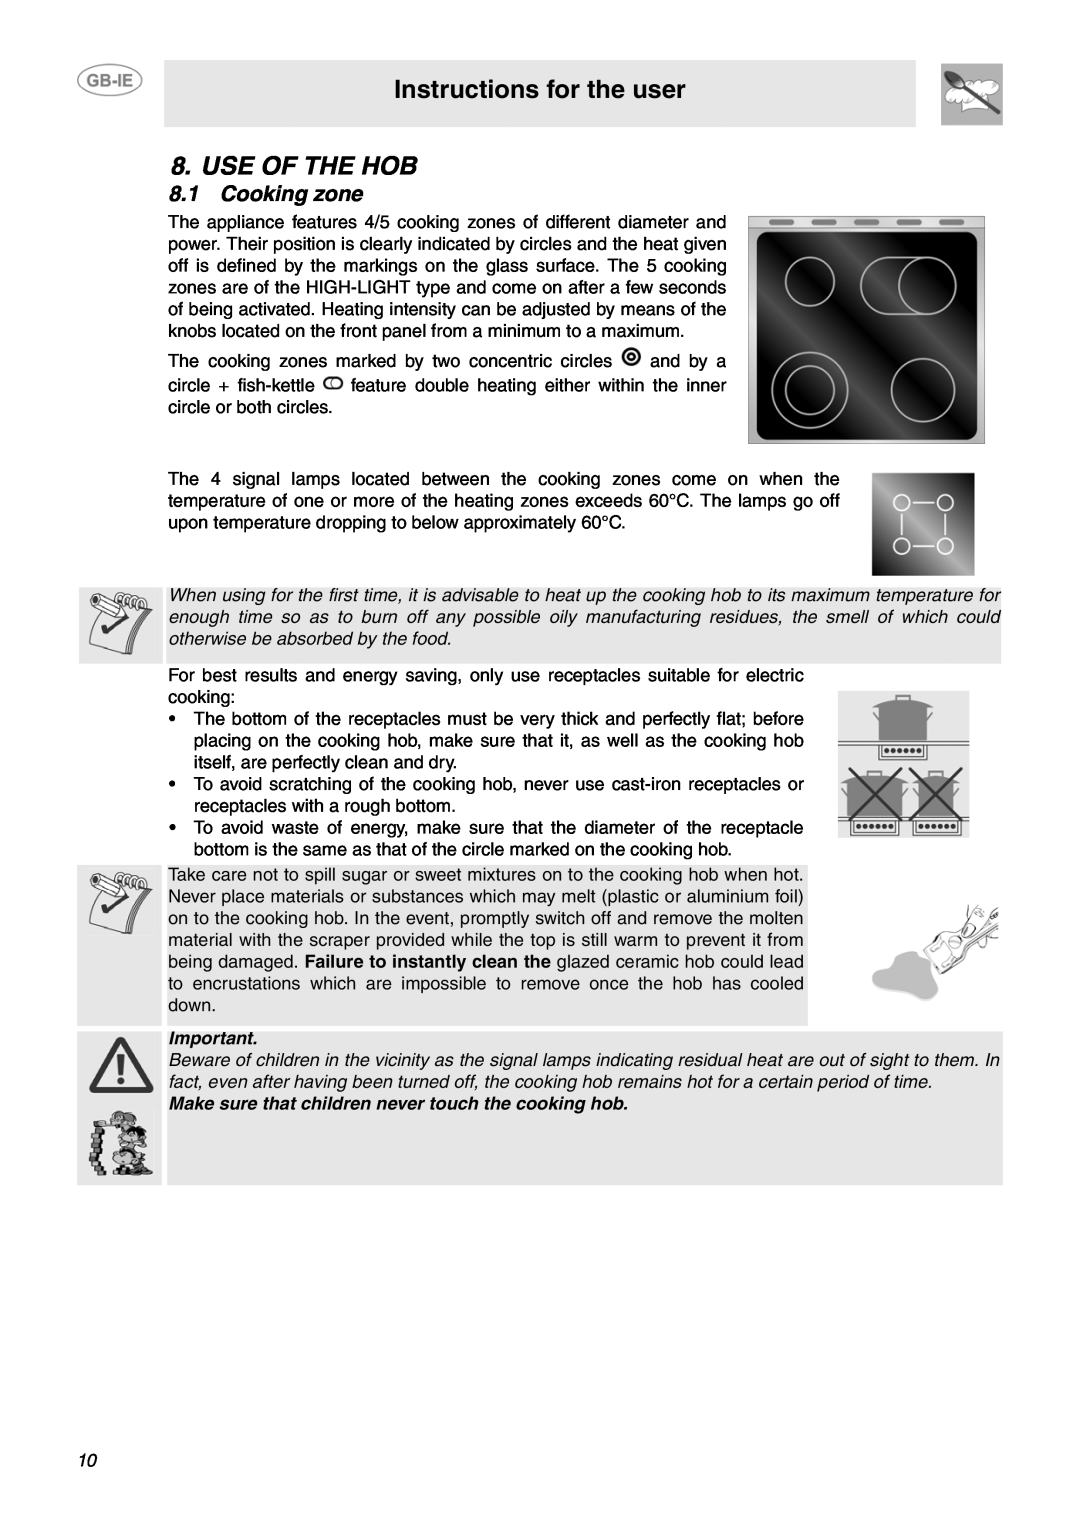 Smeg SUK61CPX5 manual Use Of The Hob, Cooking zone, Instructions for the user 